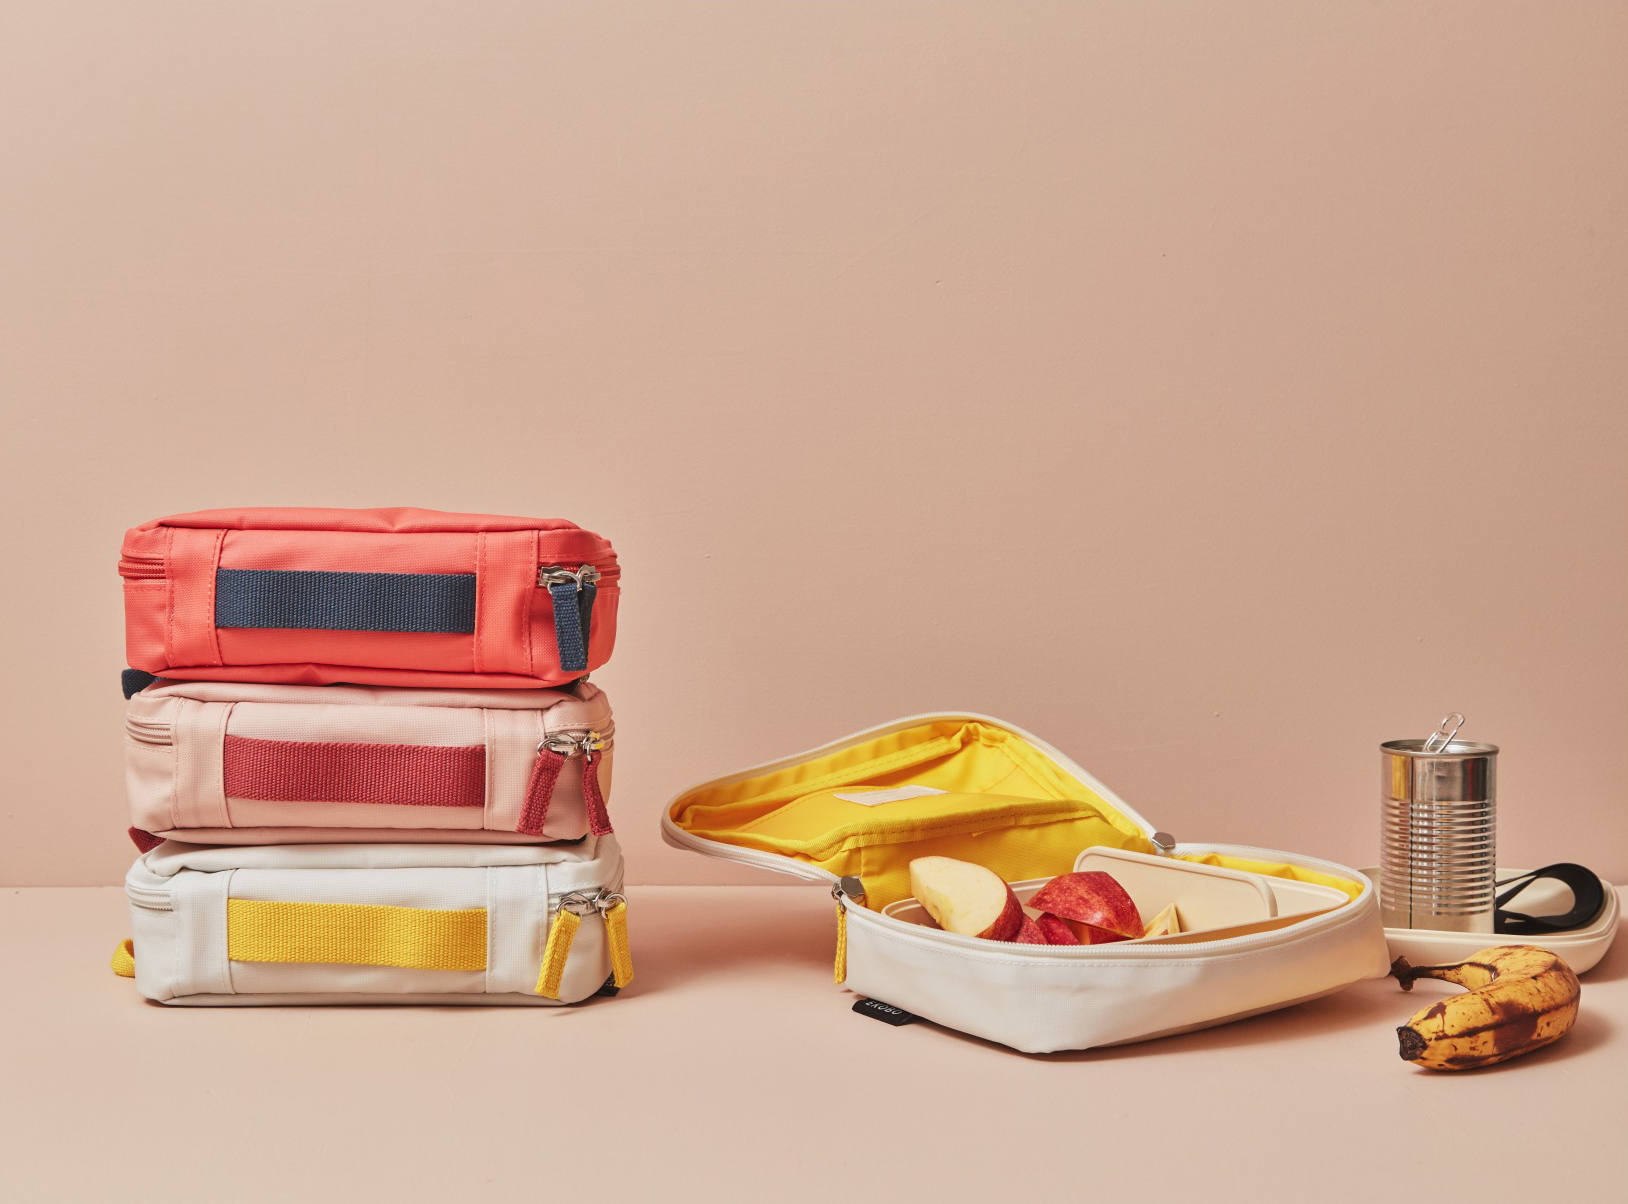 These @Simple Modern lunchboxes are SO cute!!! Check out all 4